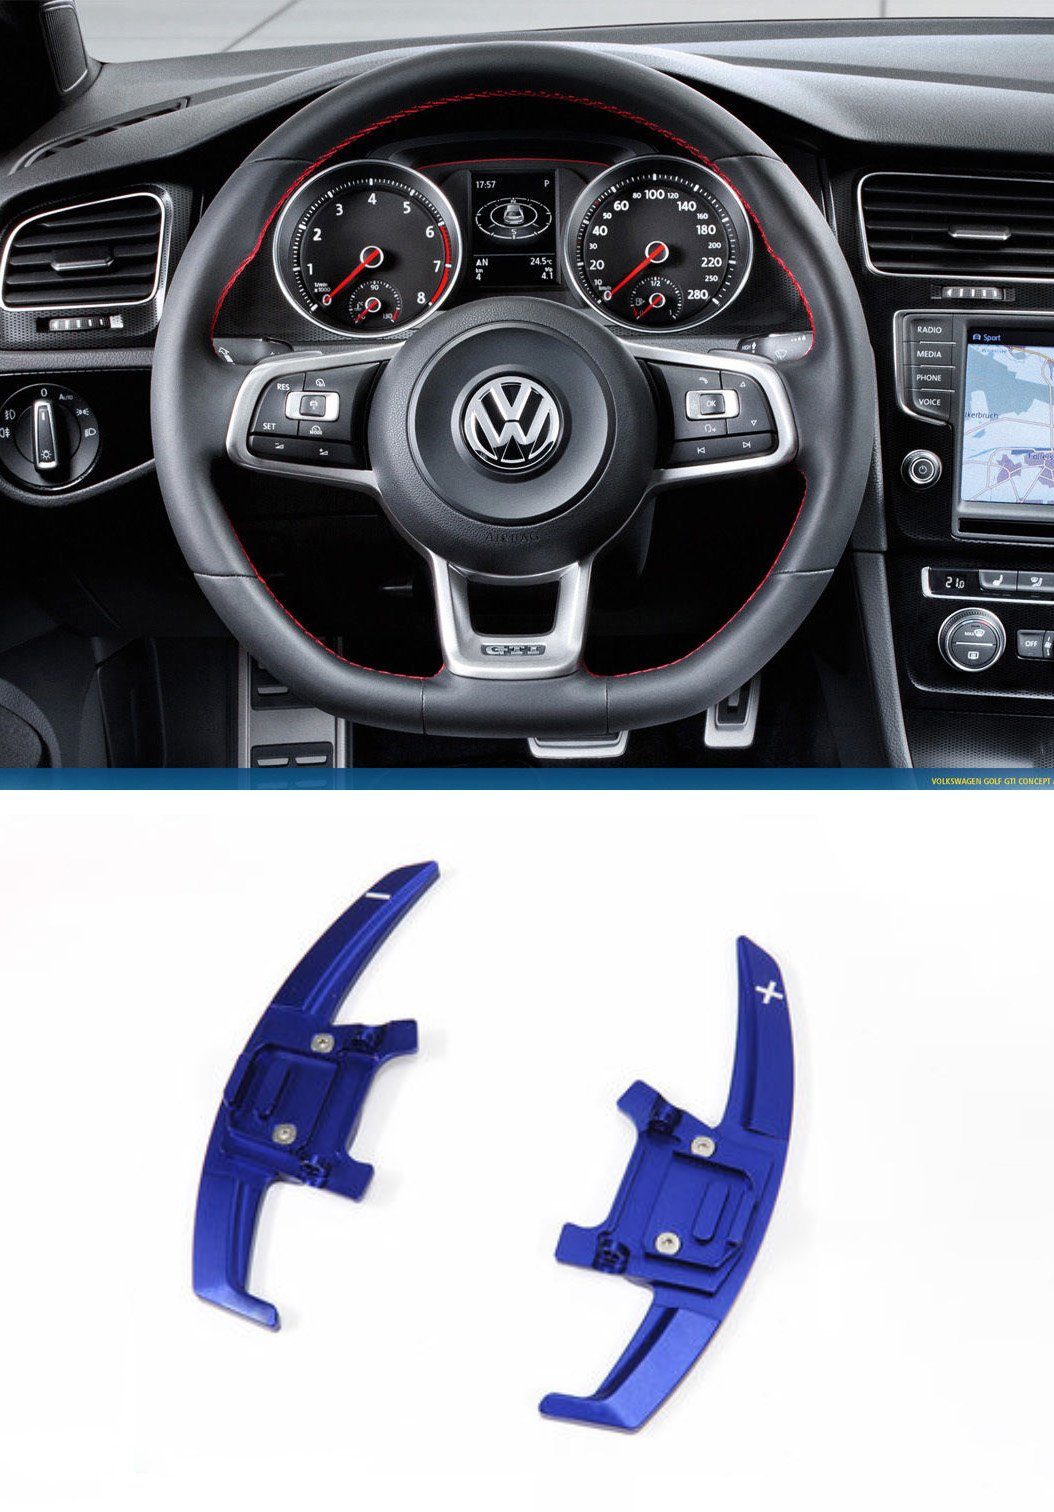 Pinalloy Aluminum Blue Paddle Shifter Extension for Automatic DSG Steering Wheel VW Golf MK7 Scirocco GTi R (Replacement Ver.)